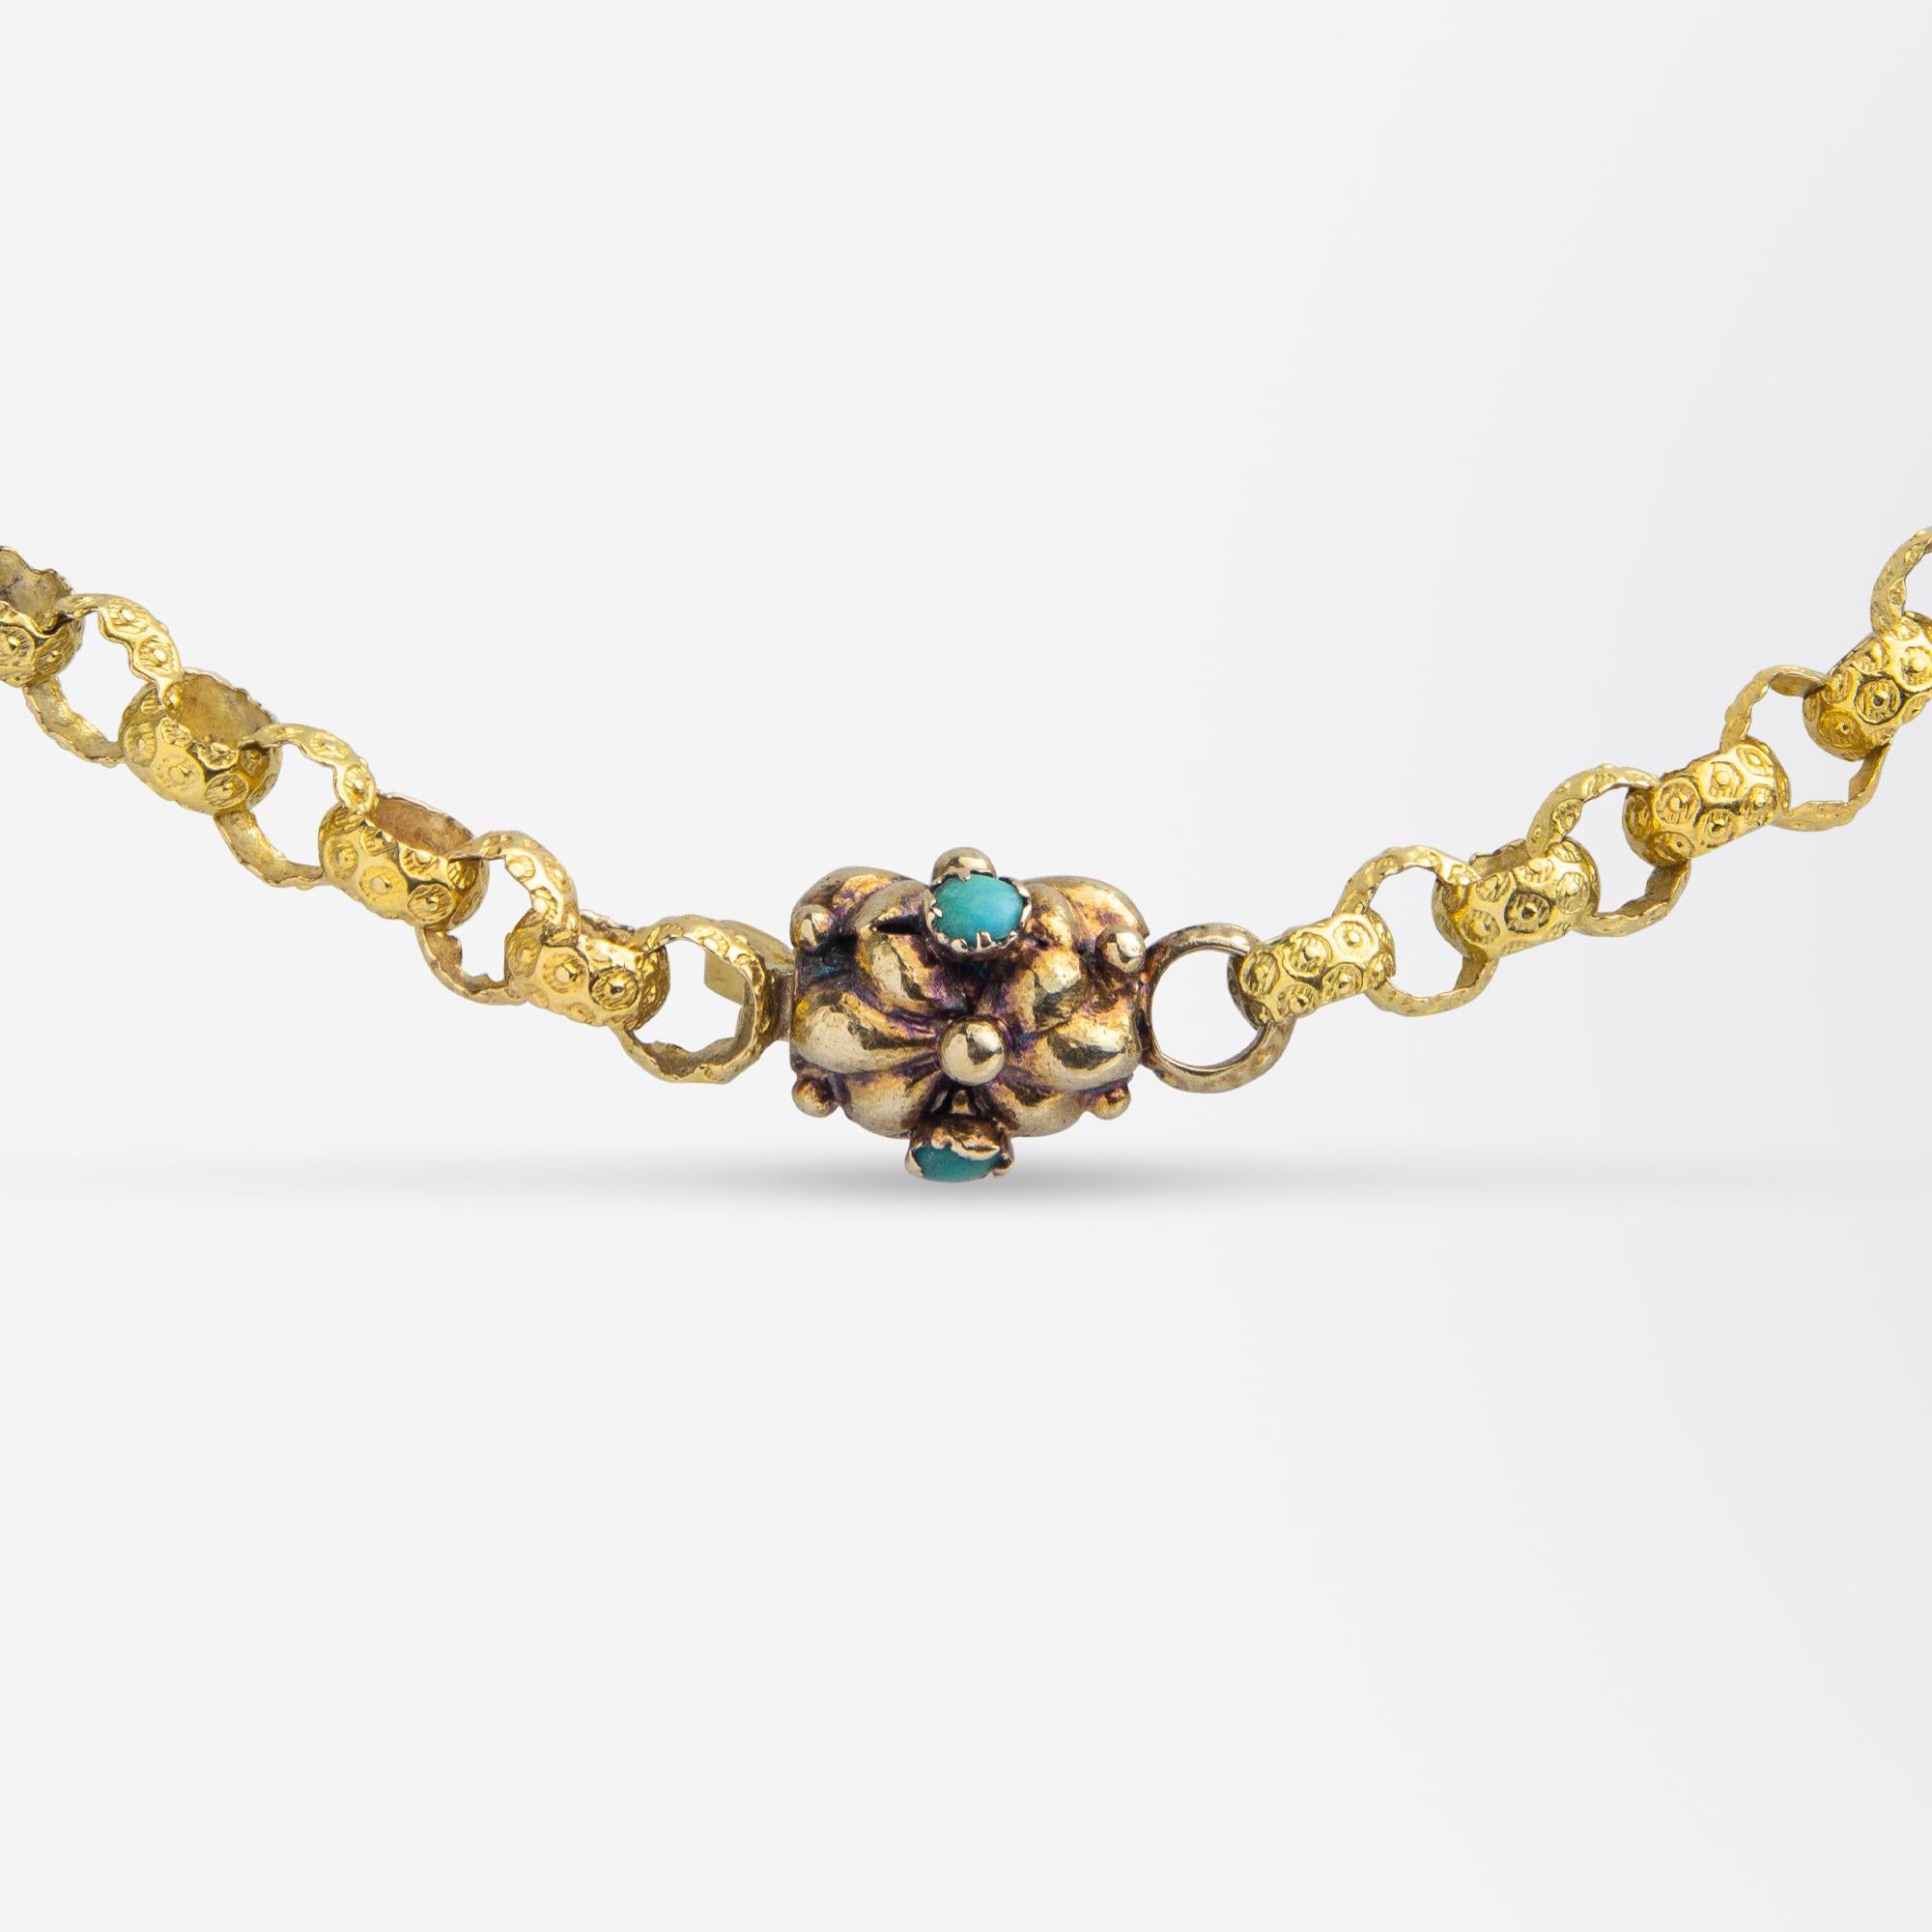 Women's or Men's Late Georgian/Early Victorian 18 Karat Gold & Turquoise Muff Chain For Sale